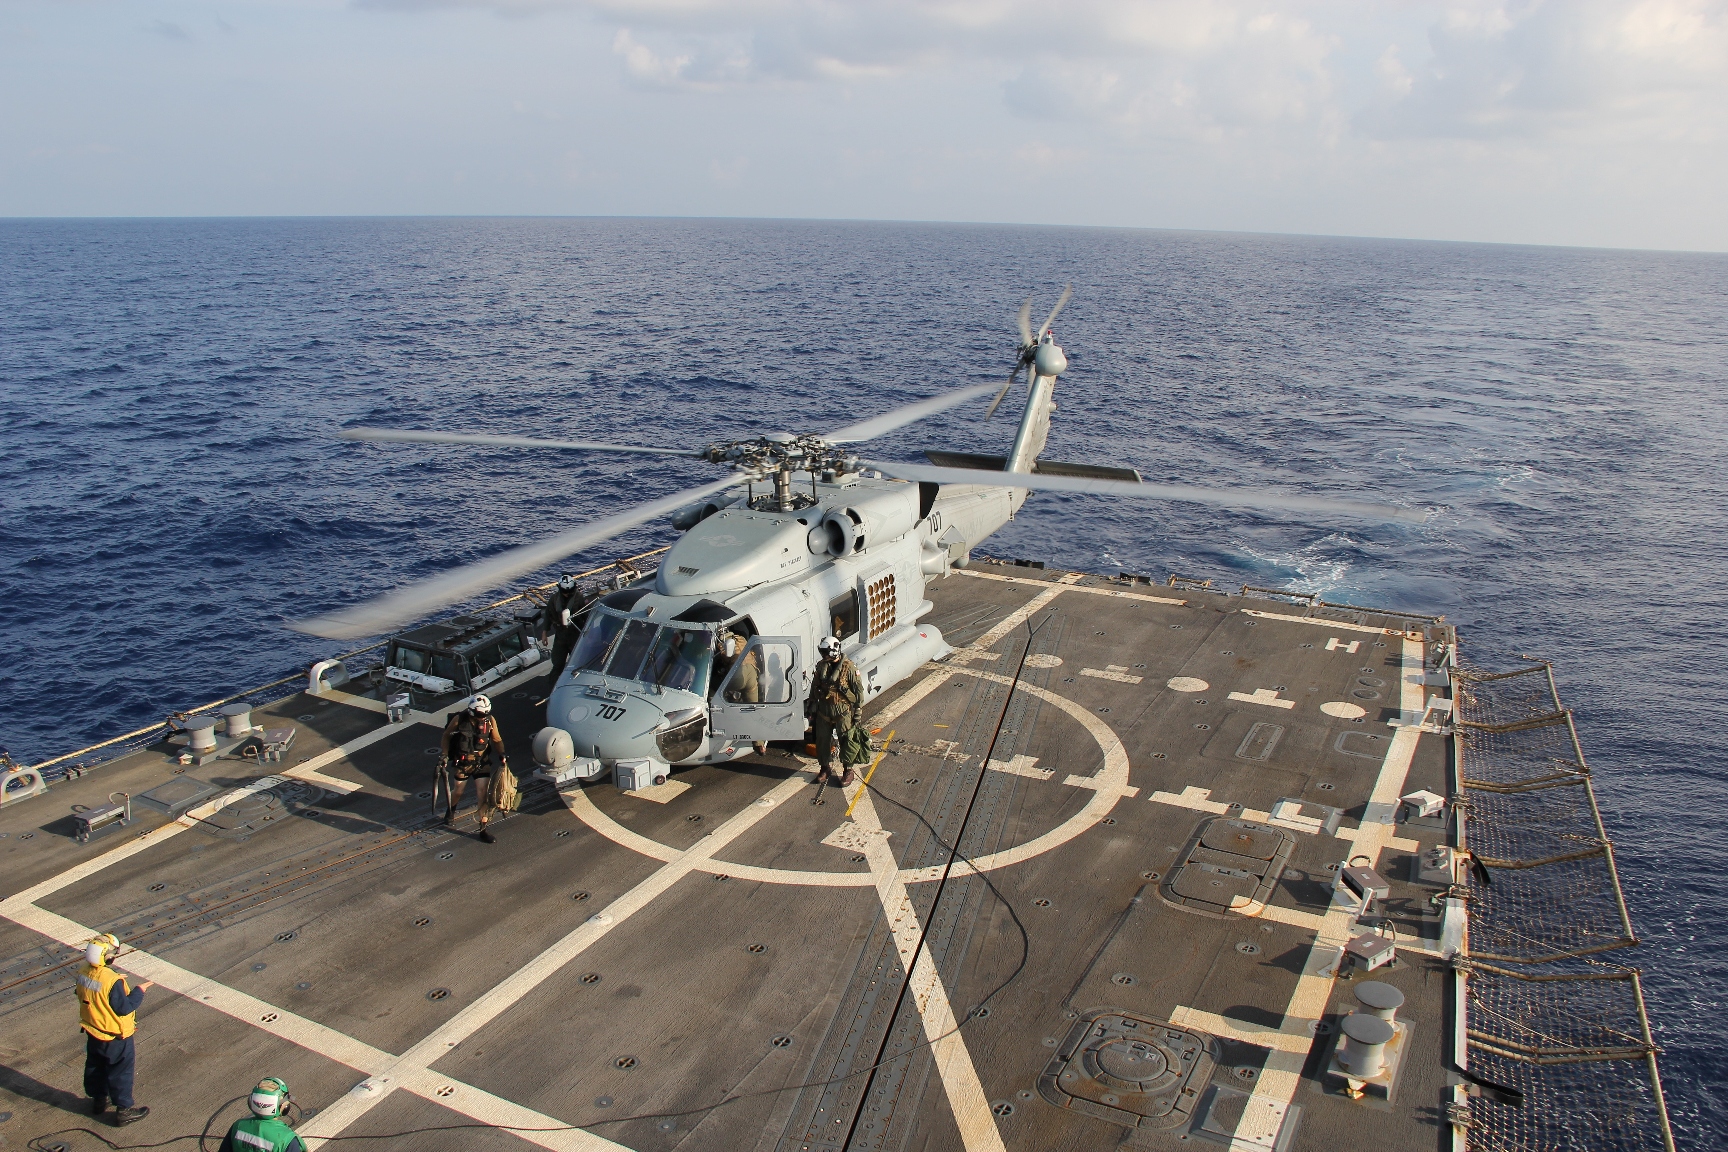 A U.S. Navy MH-60R Sea Hawk helicopter preparing to return to the search and rescue for the missing Malaysian airlines flight MH370 on March 9, 2014 at sea in the Gulf of Thailand. (U.S. Navy — Getty Images)